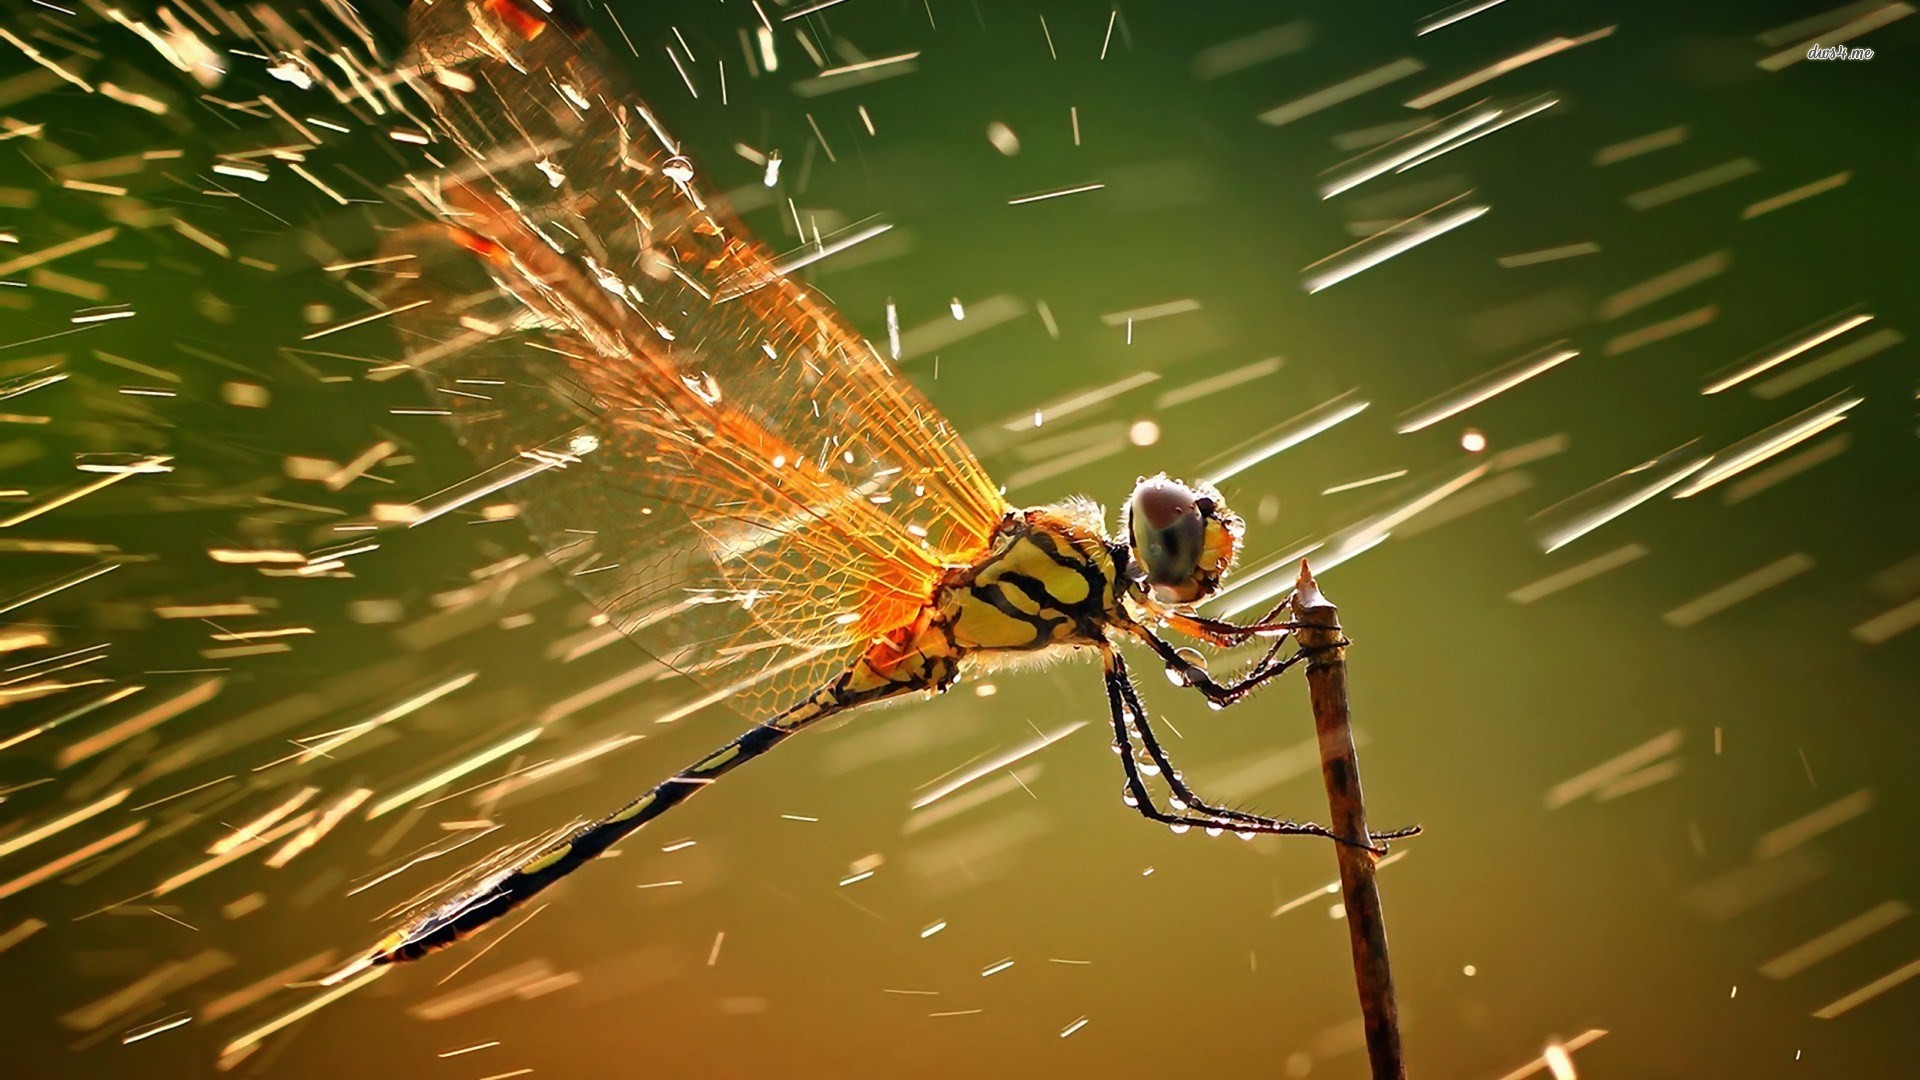 Free screensaver wallpapers for dragonfly